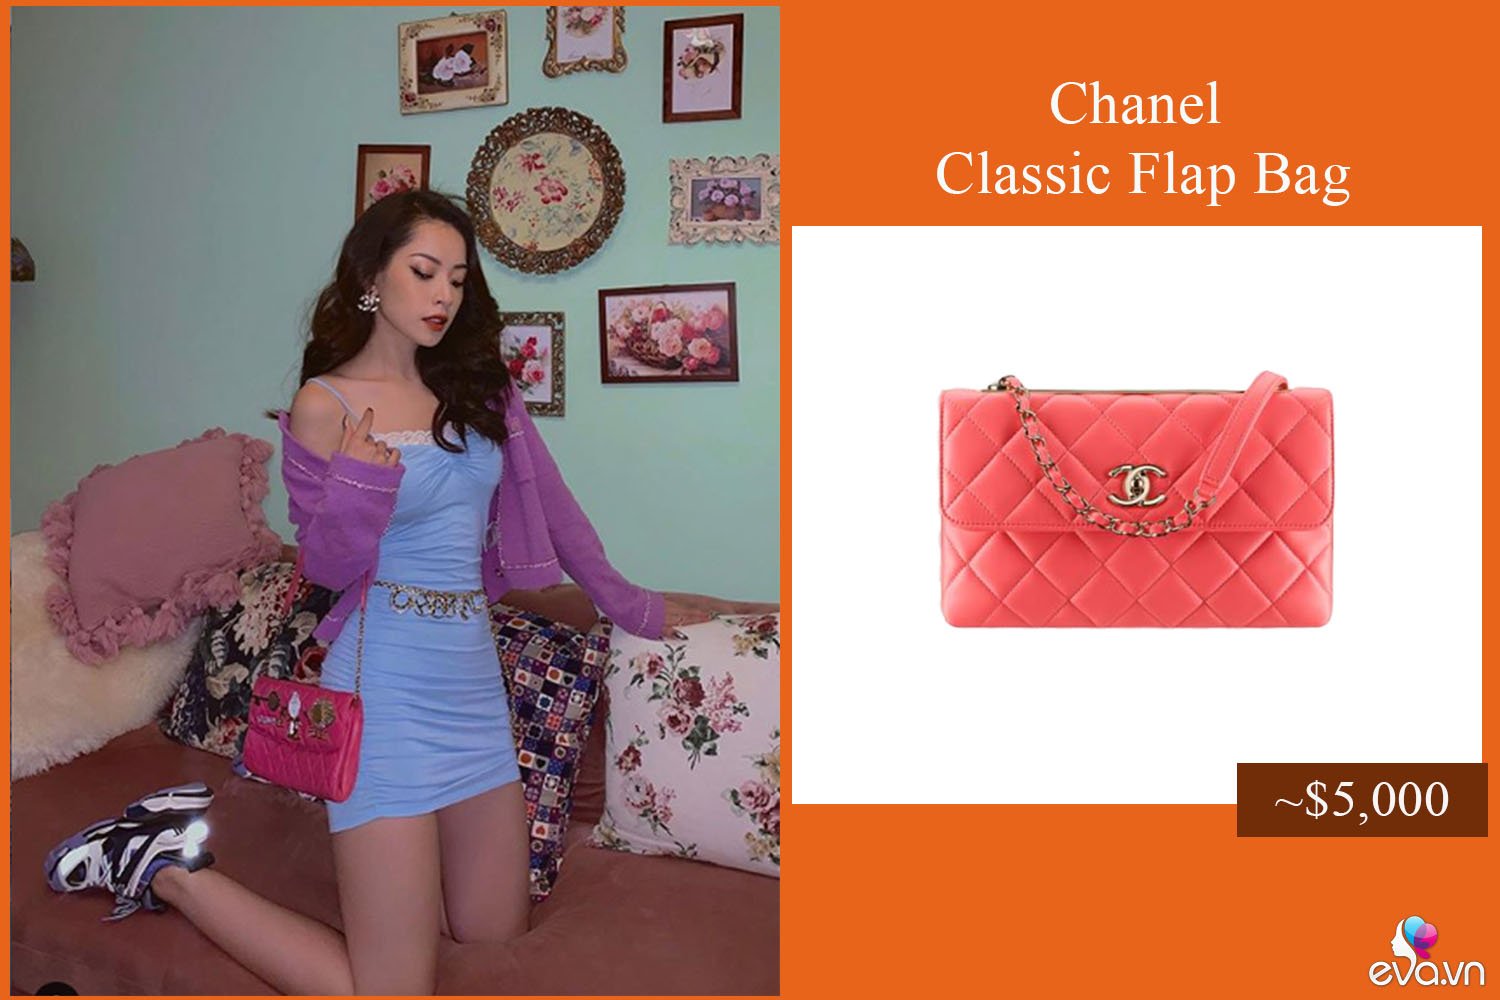 han quoc co jennie, viet nam co chi pu tham vong tro thanh “quy co chanel” - 4